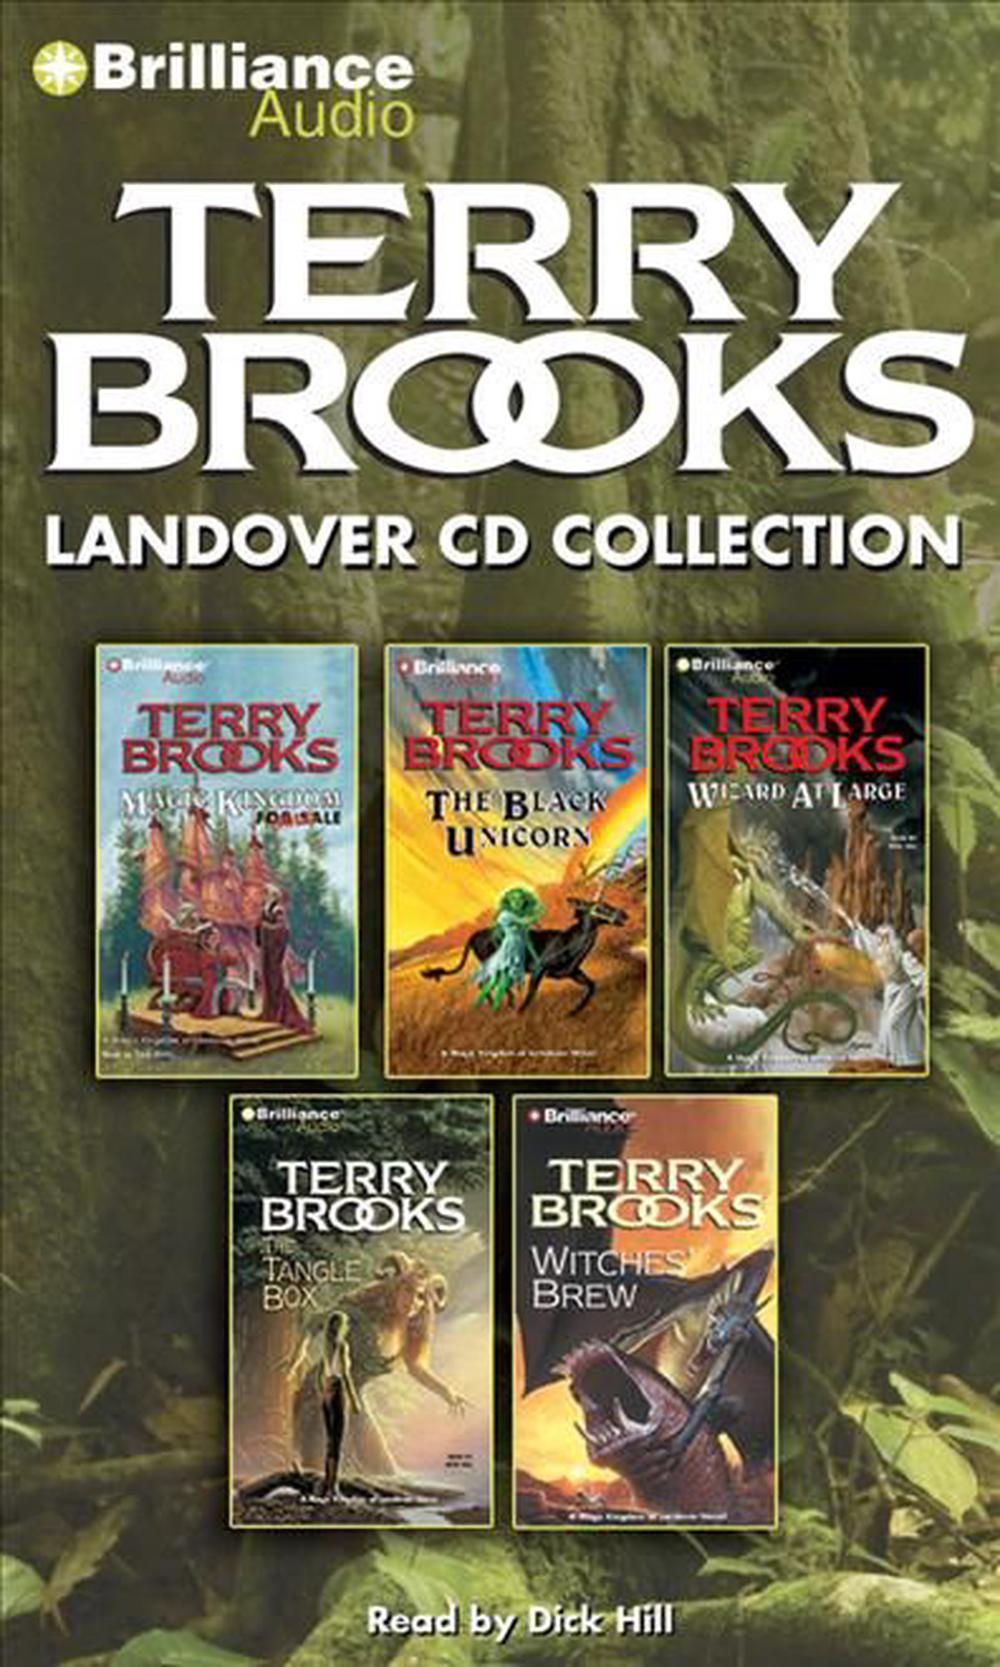 Terry Brooks Landover CD Collection by Terry Brooks (English) Compact